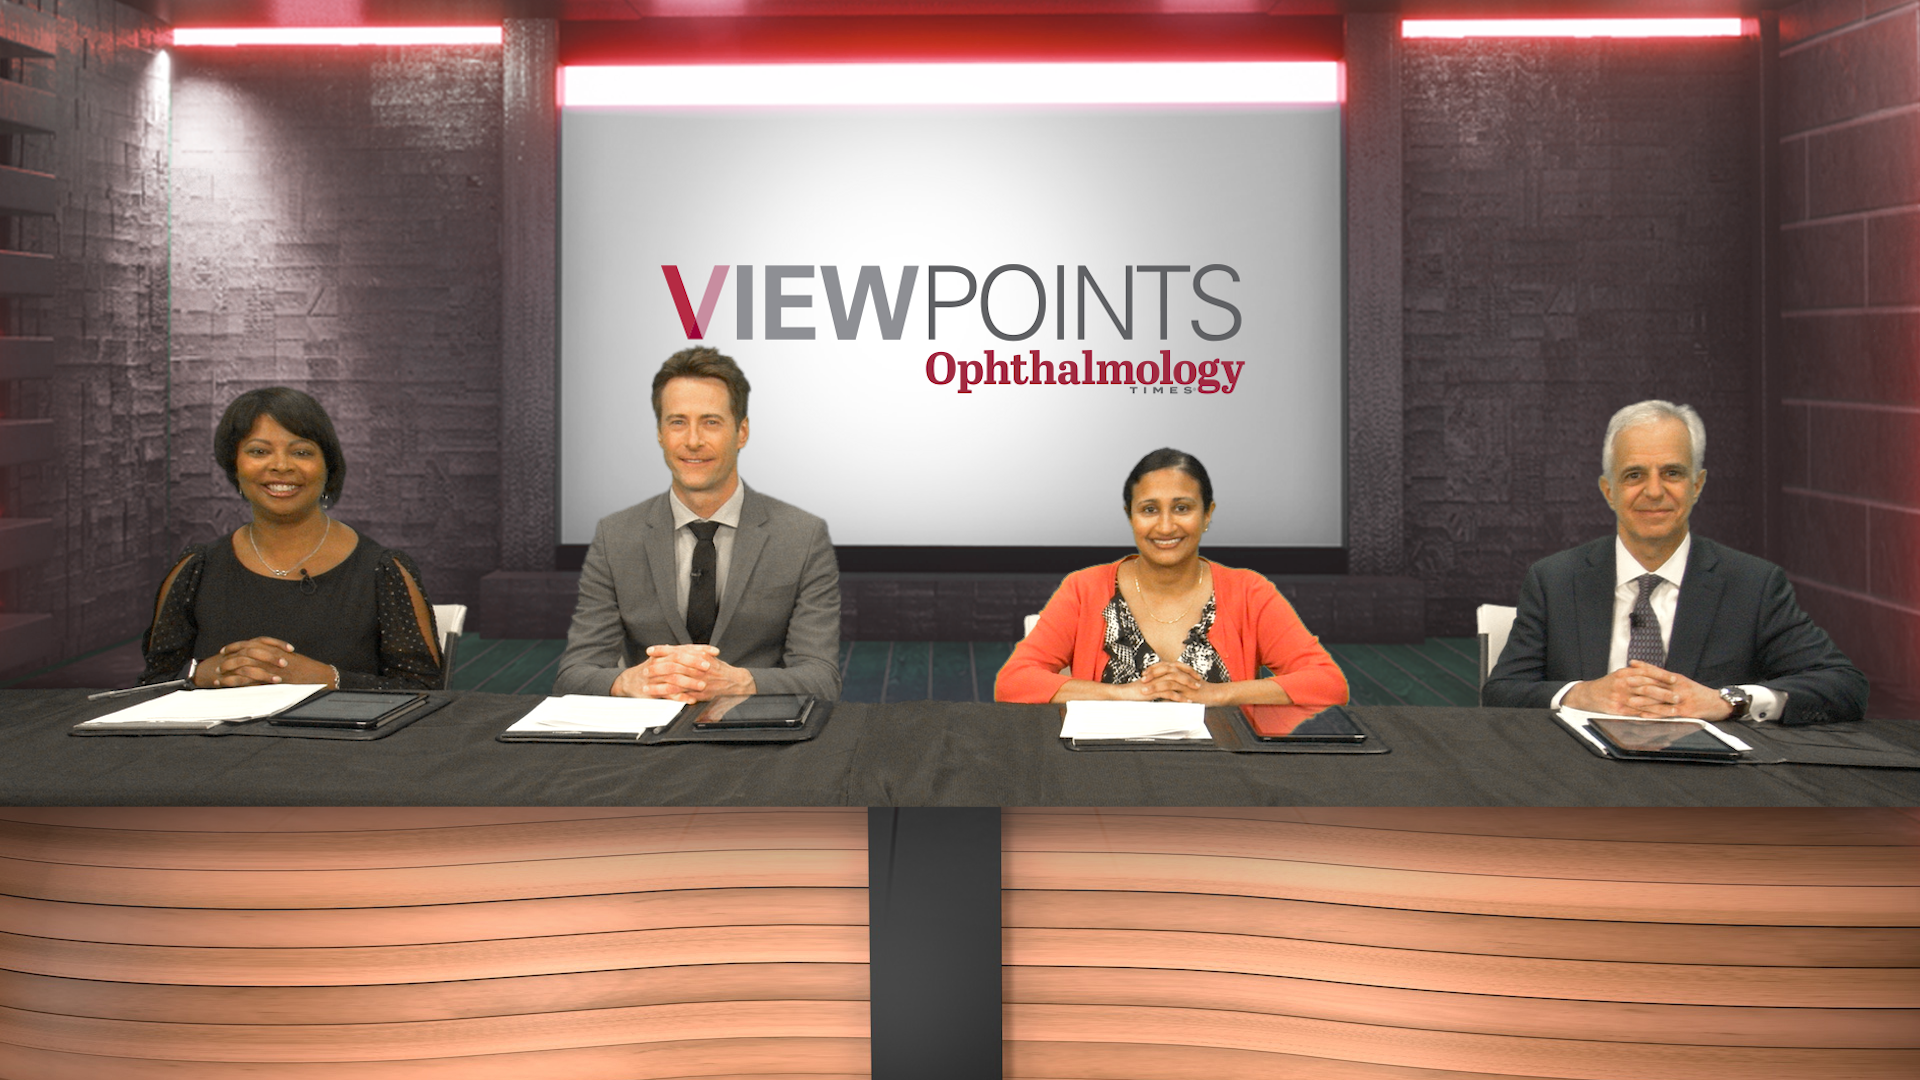 New Therapies to Supplement Anti-VEGF Treatments in Neovascular AMD and DME